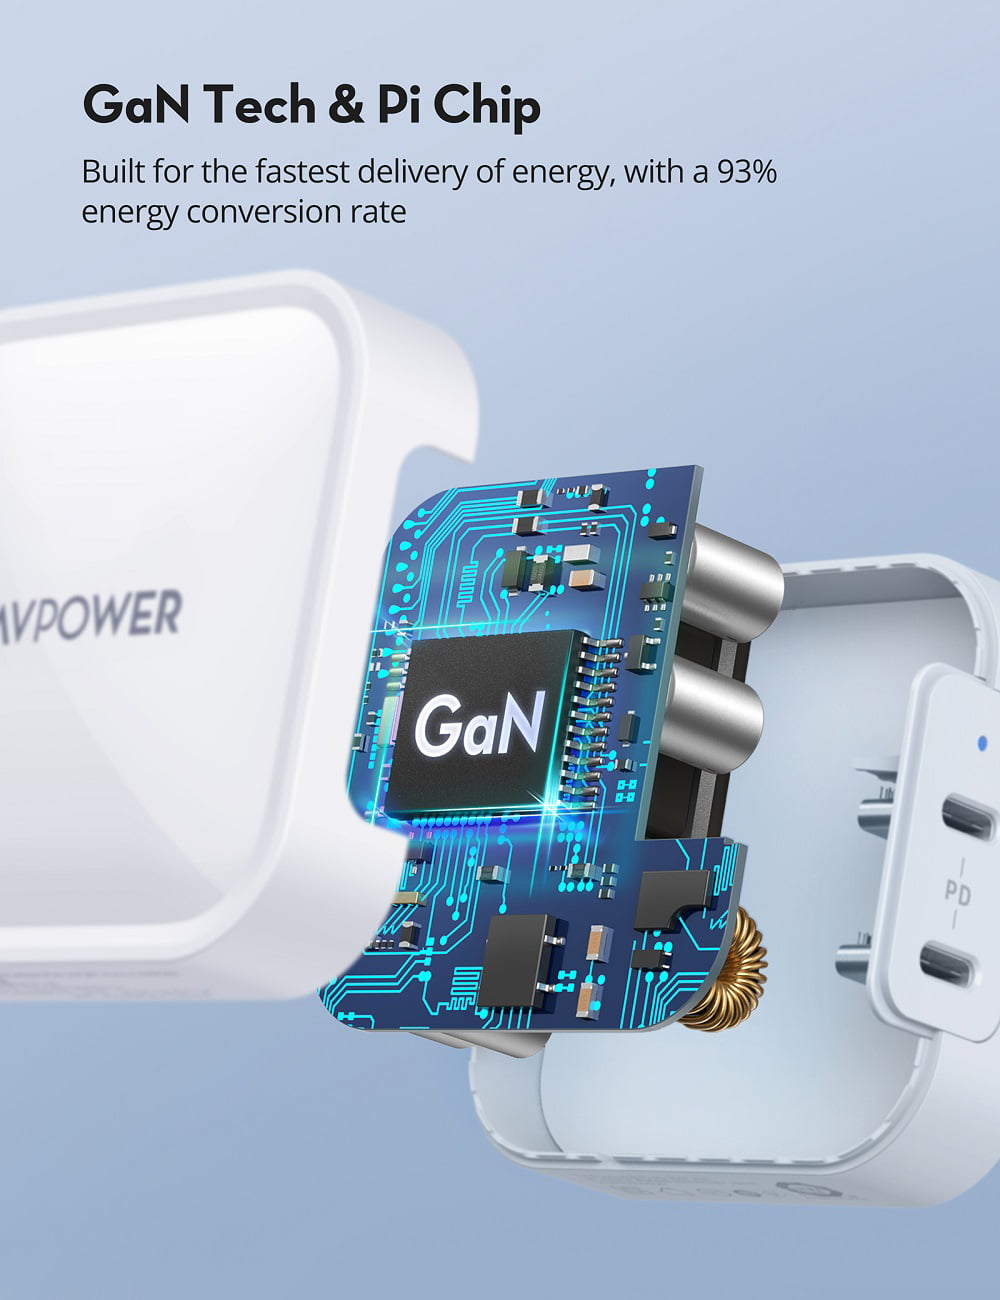 Hands-on: 90W GaN dual USB-C charger from RAVPower - 9to5Mac